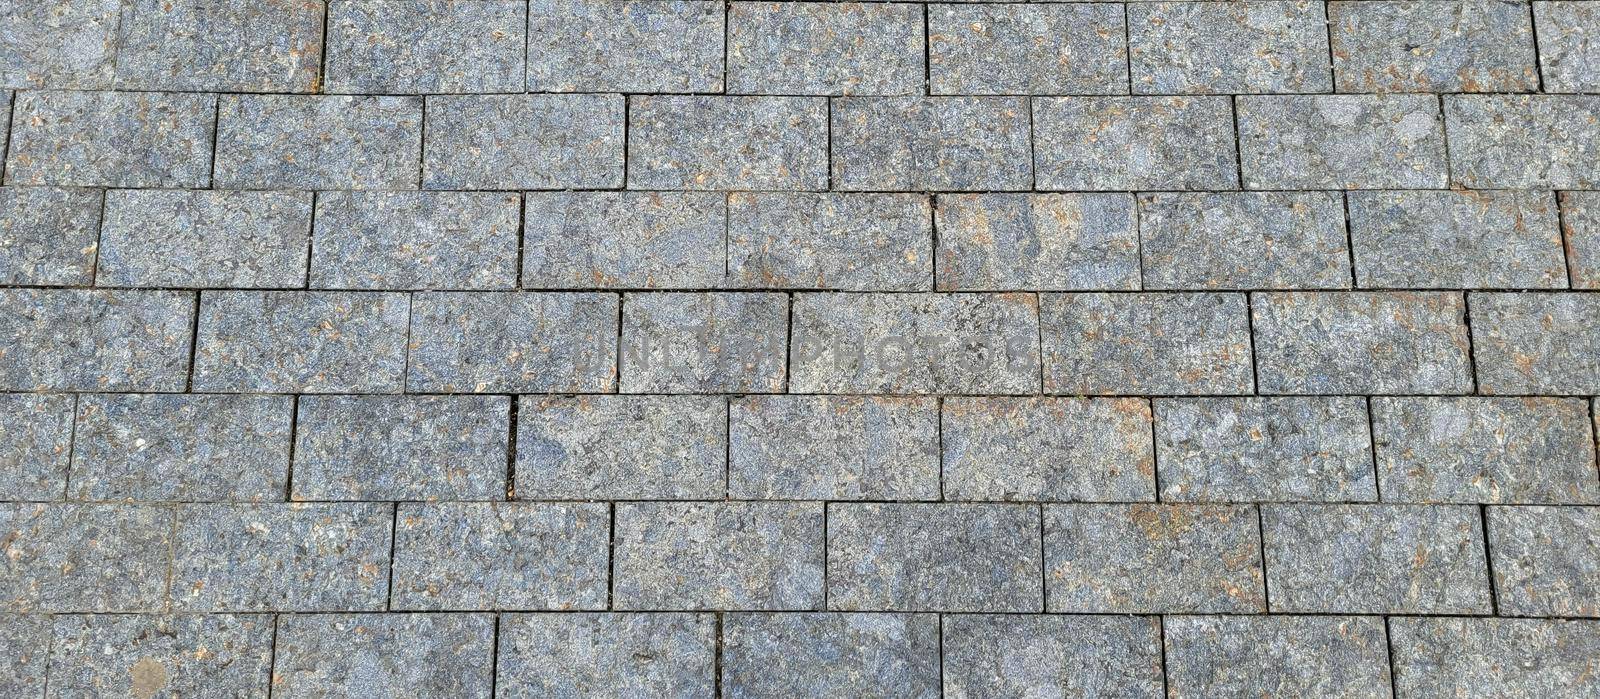 Texture of concrete pavement or sidewalk with paving slabs, top view. Blocks of the sidewalk pattern, details of the stone-tiled path